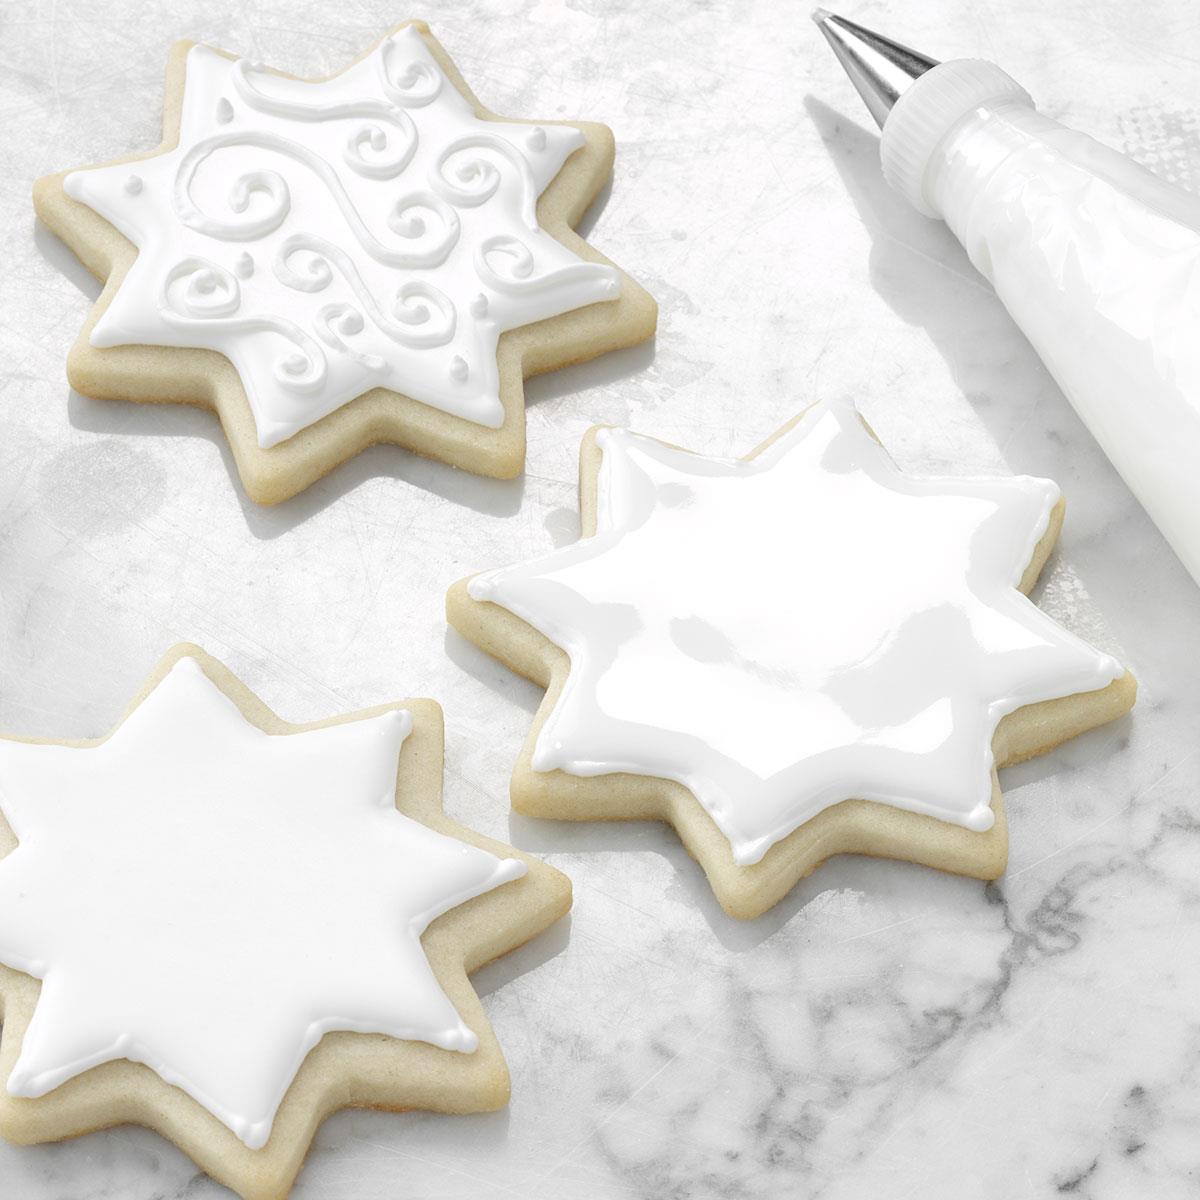 Royal Icing Without Meringe Powder Or Tarter : How To Make Royal Icing Better Serious Eats : Add ...